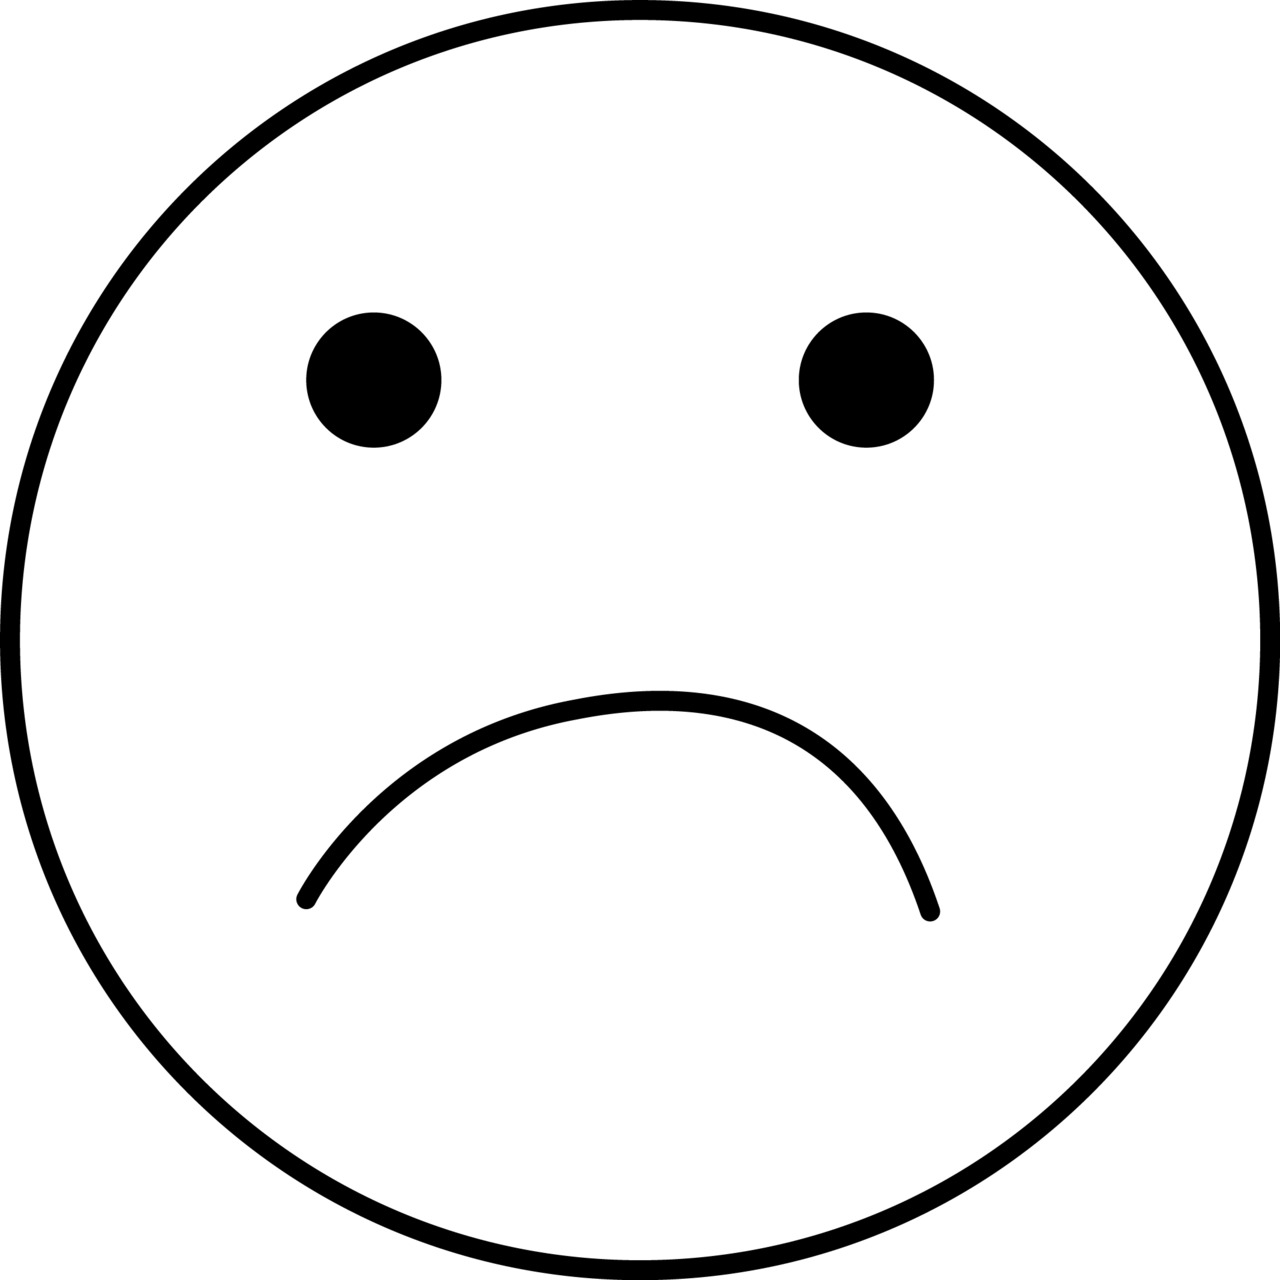 Pictures Of A Sad Face - Clipart library